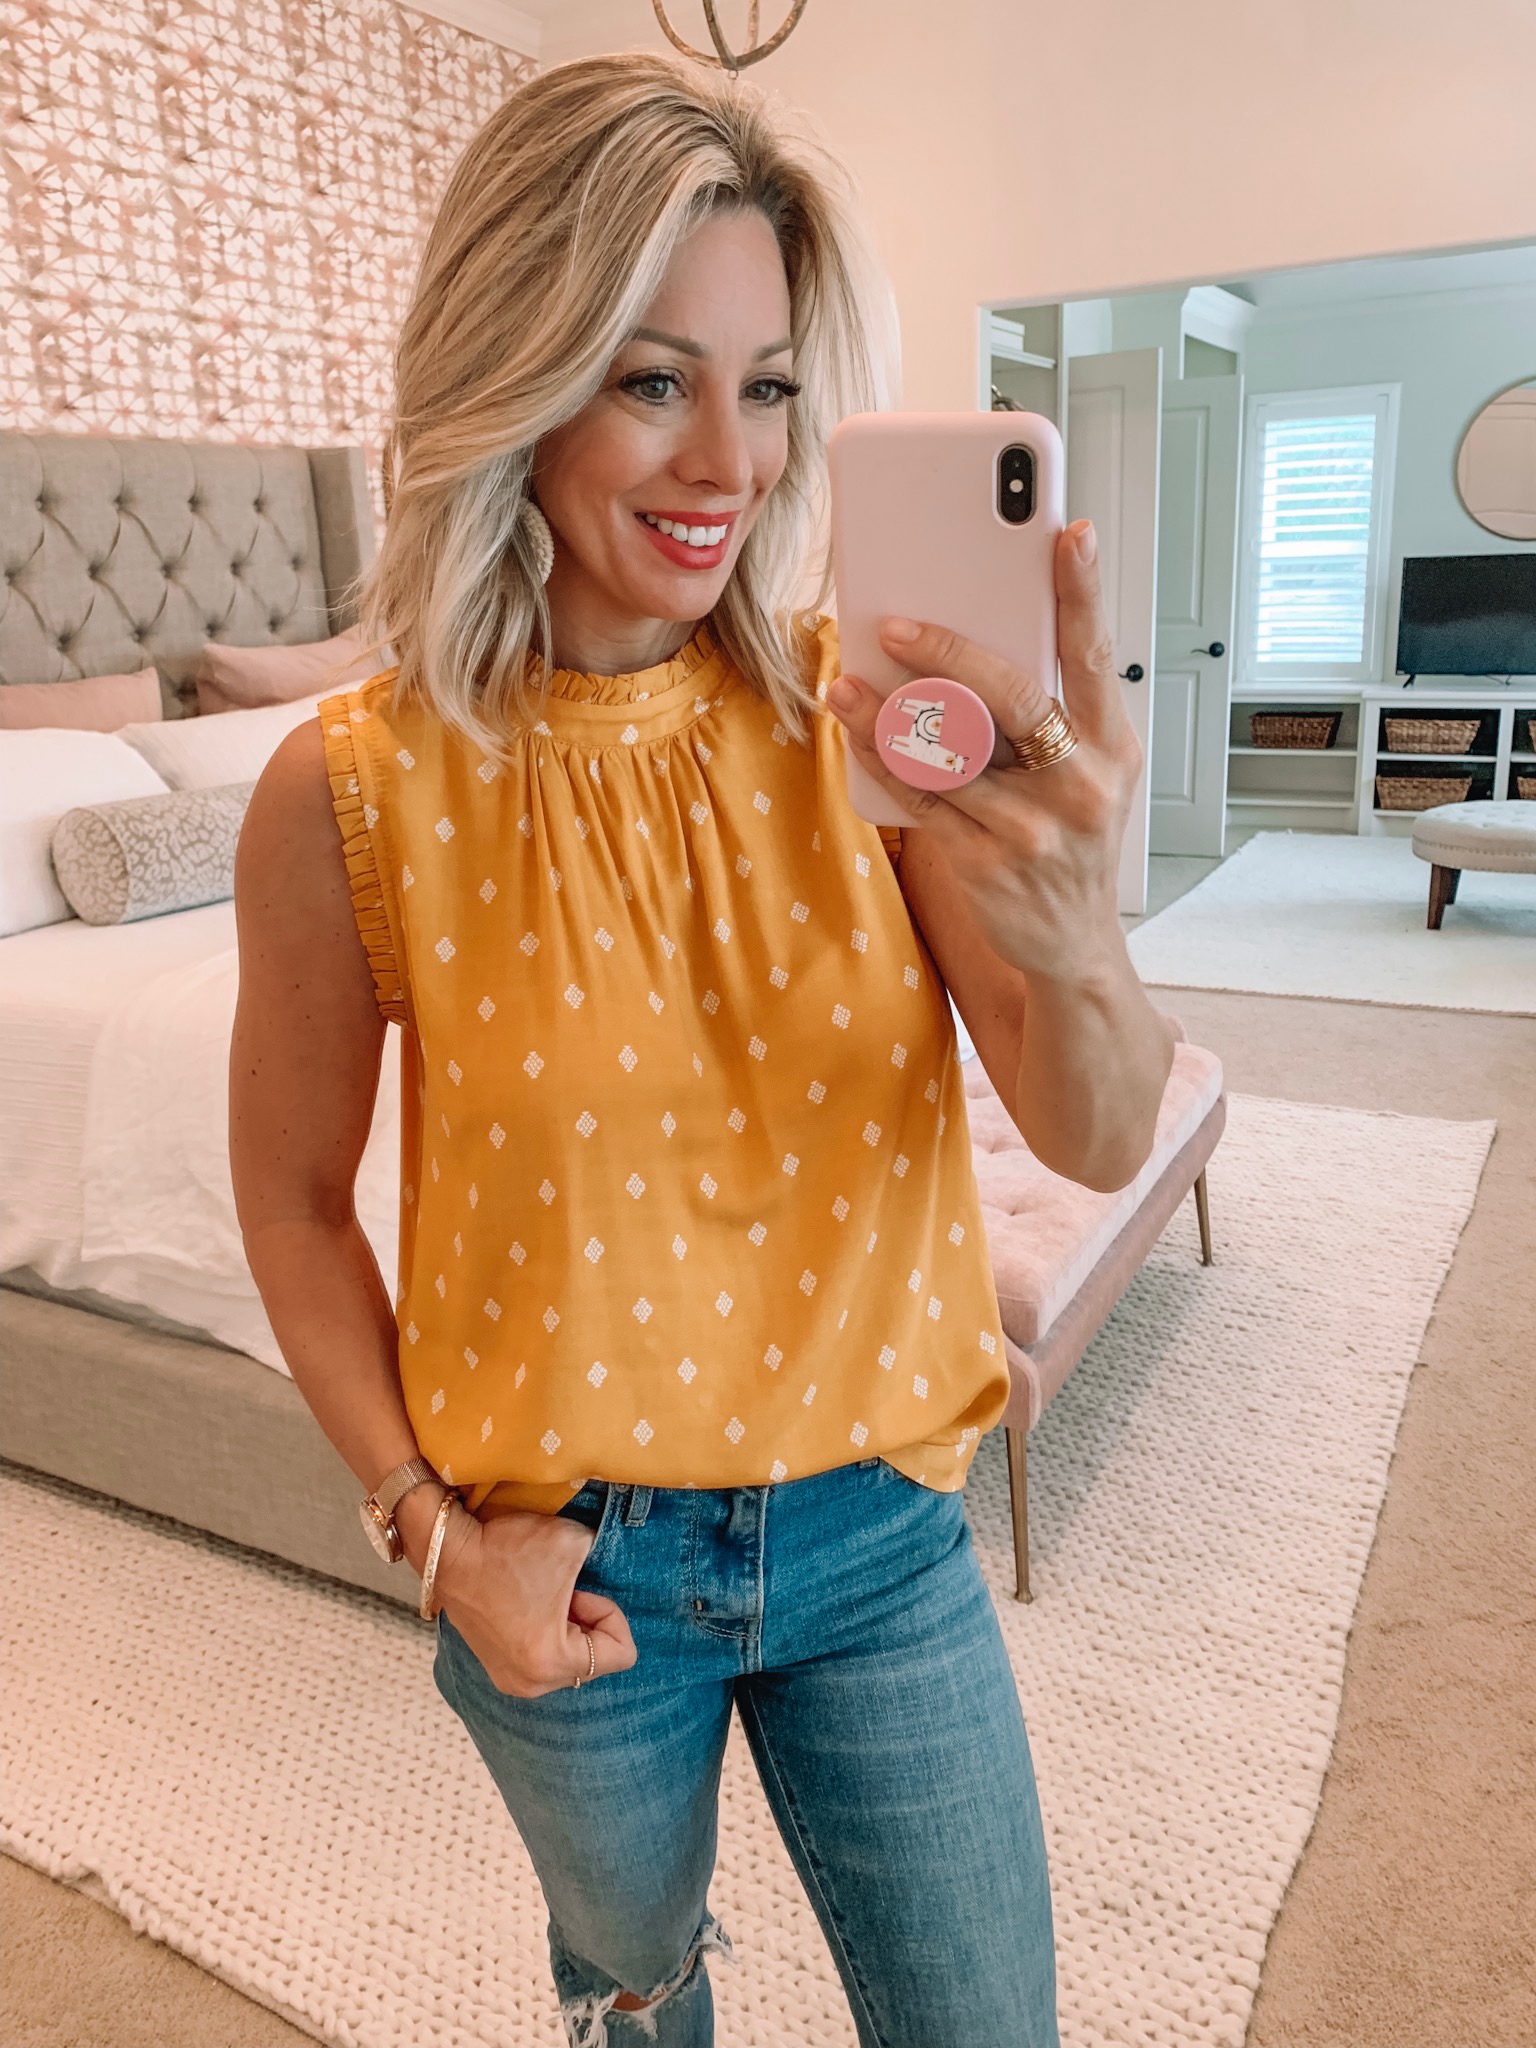 Marigold top and ripped jeans with wedges